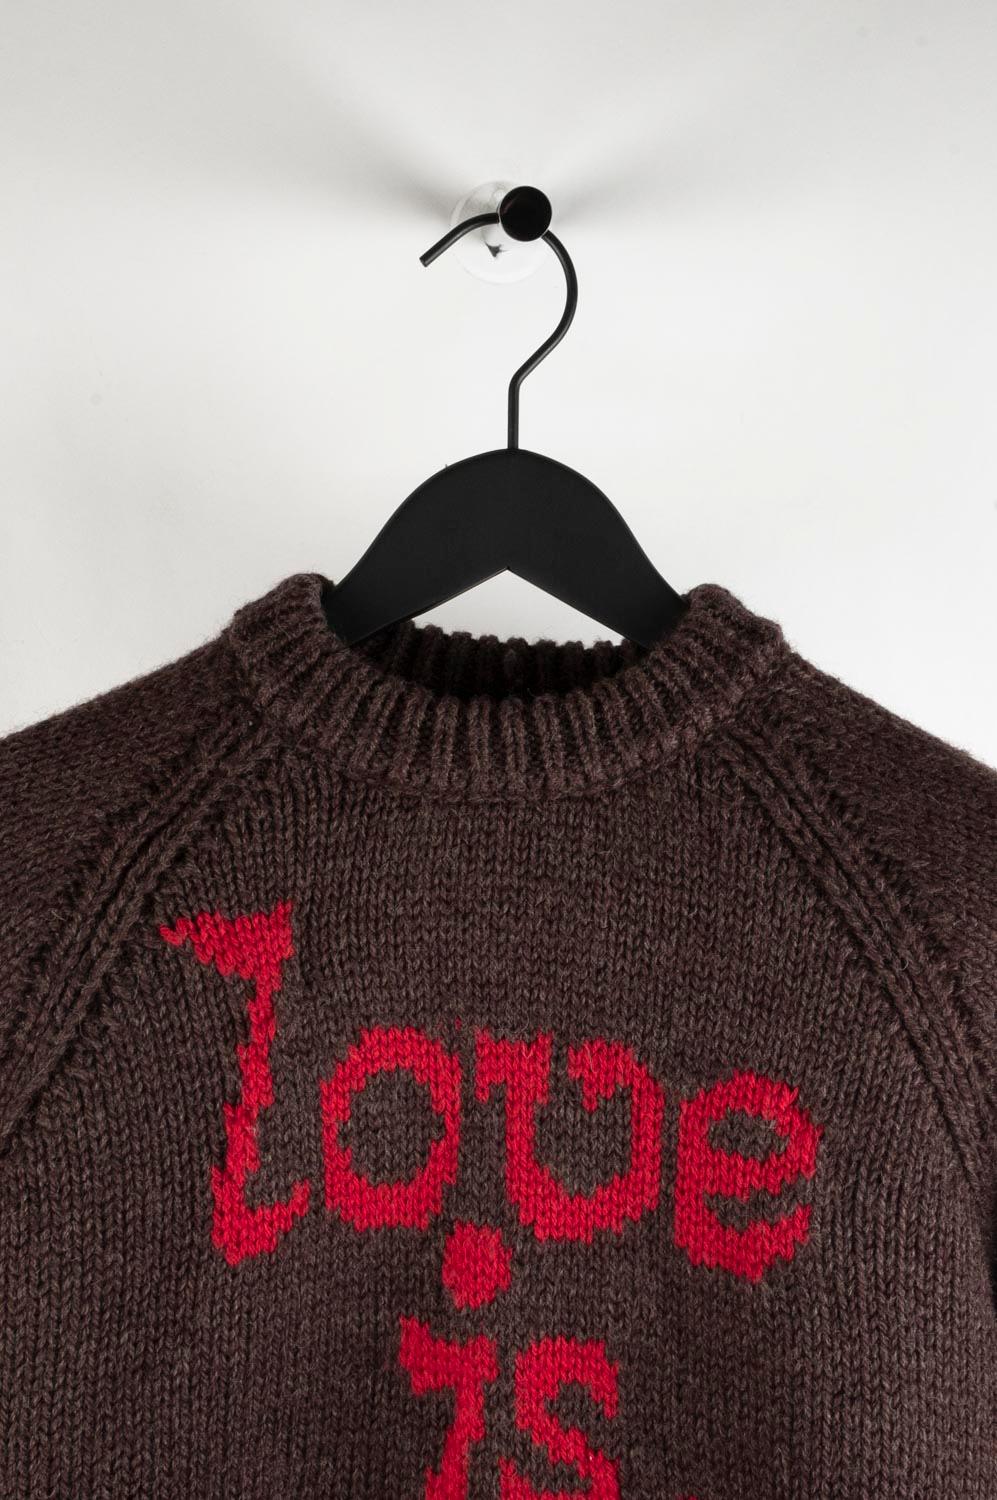 Item for sale is 100% genuine Dsquared2 Wool Knit Woman Sweater, S479
Color: Brown
(An actual color may a bit vary due to individual computer screen interpretation)
Material: 100% wool
Tag size: M (fits as well for Small size)
This sweater is great